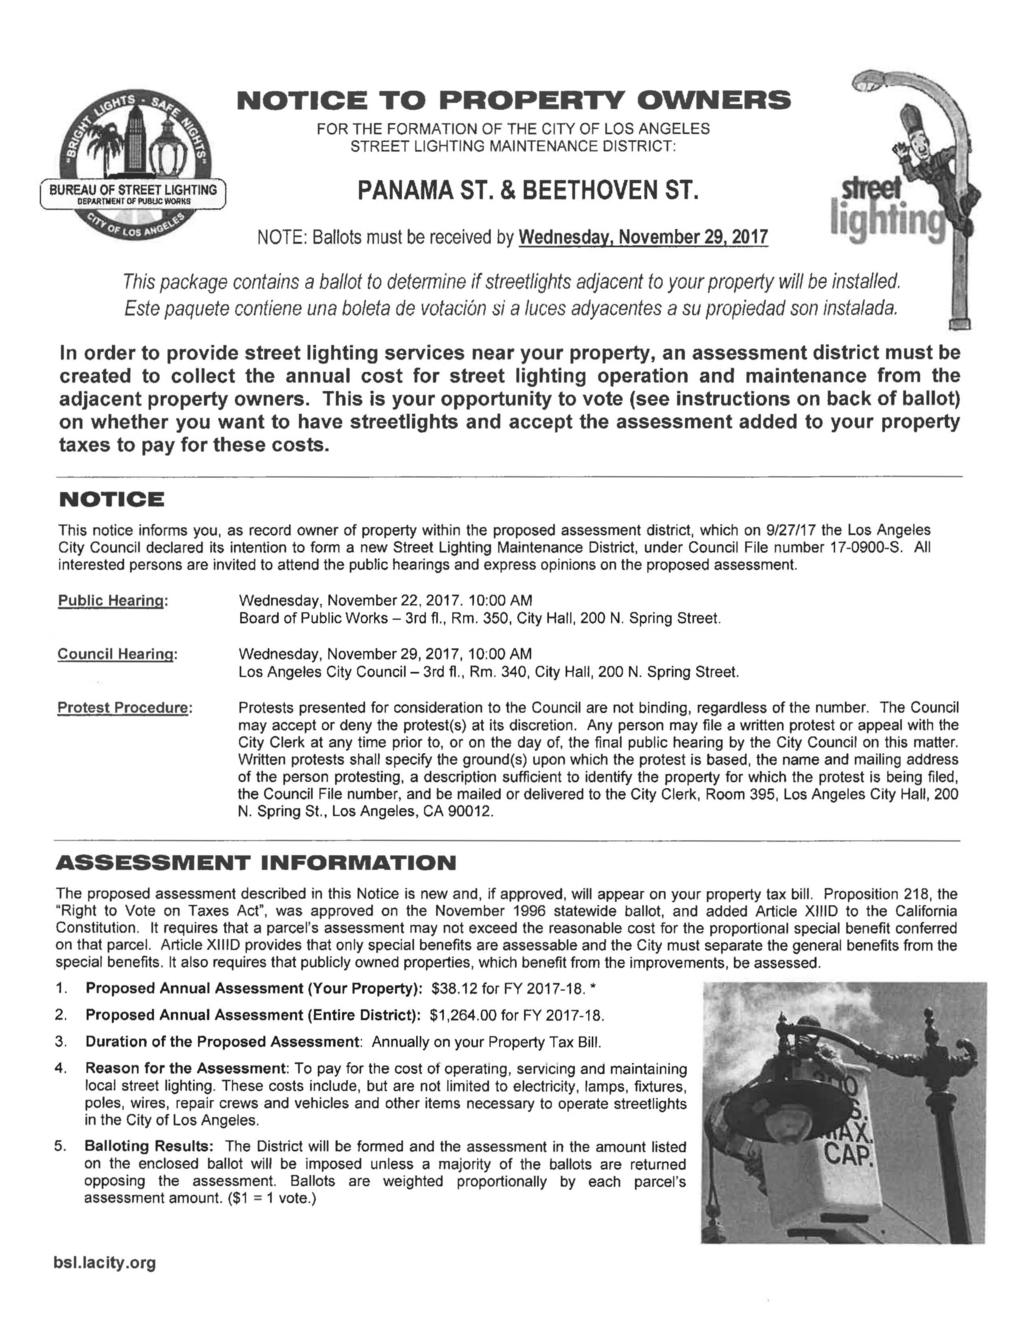 BUREAU OF STREET LIGHTING DEPARTMENT OF PUflUC WORKS NOTICE TO PROPERTY OWNERS FOR THE FORMATION OF THE CITY OF LOS ANGELES STREET LIGHTING MAINTENANCE DISTRICT: PANAMA ST. & BEETHOVEN ST.